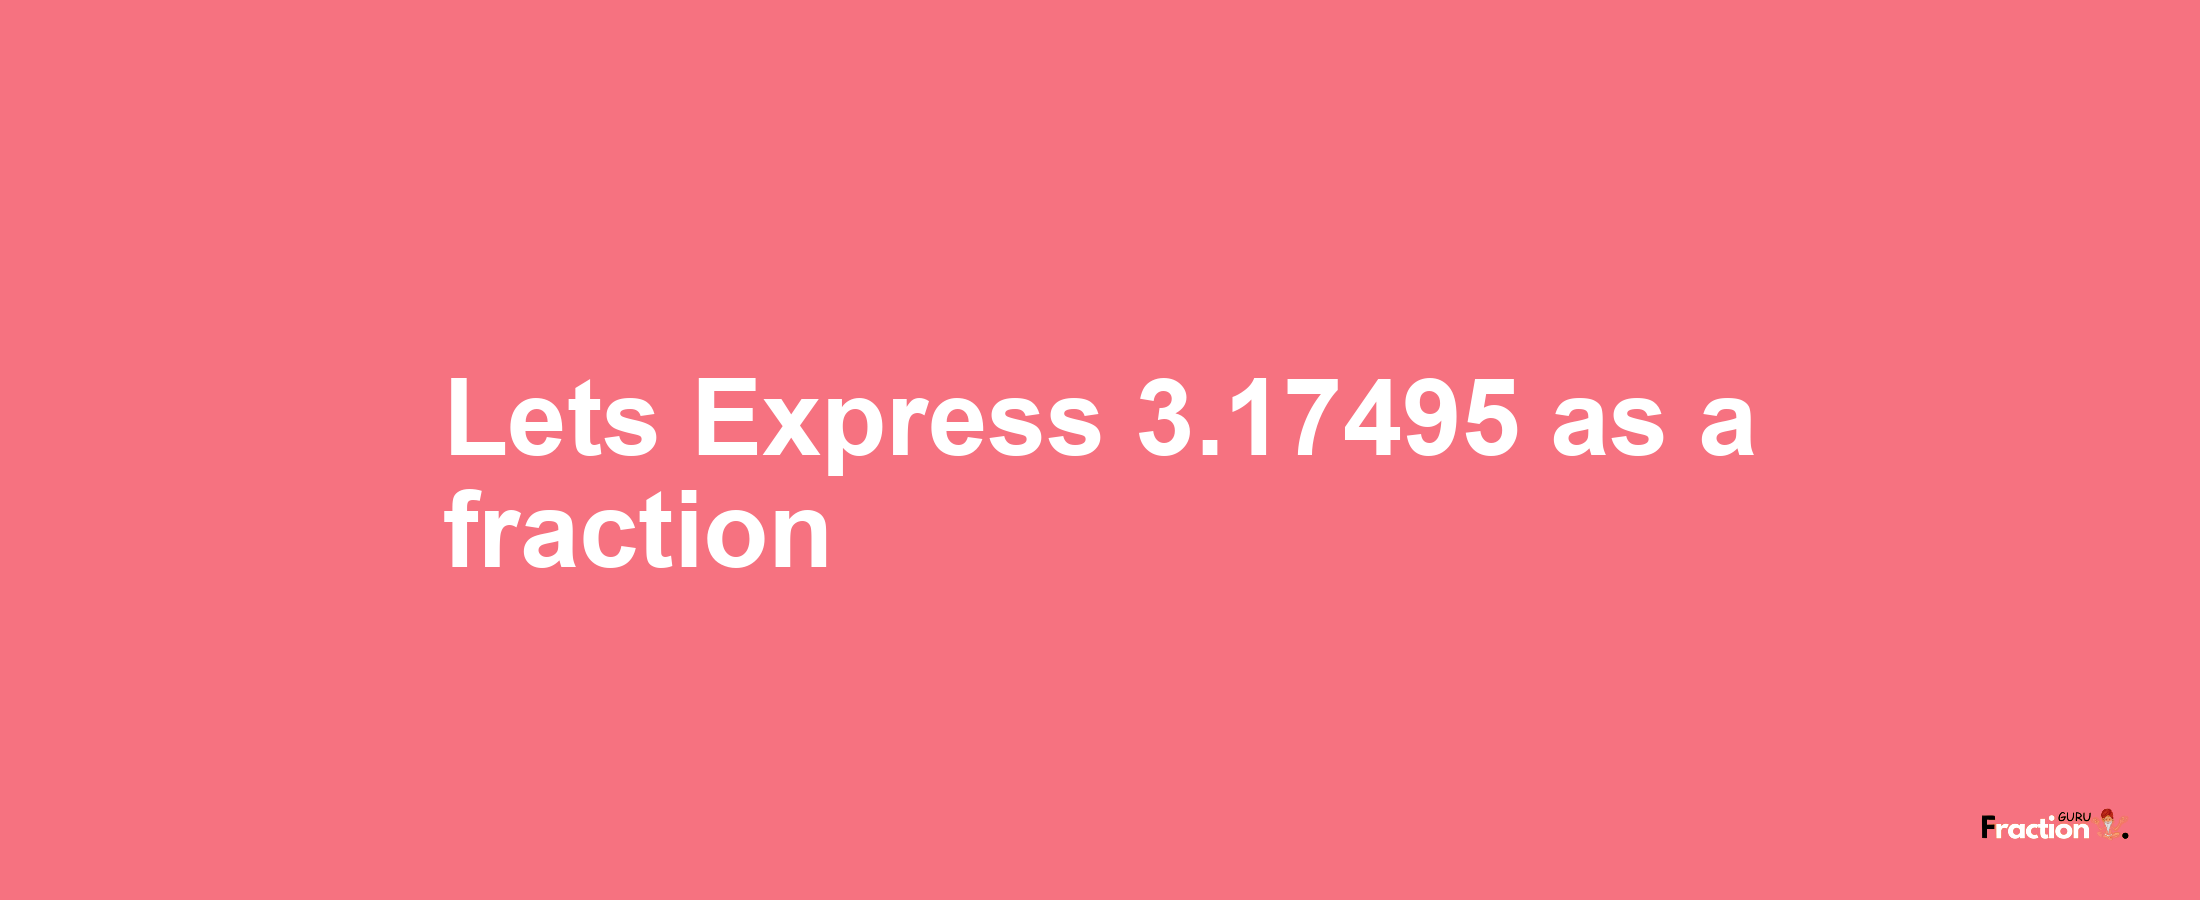 Lets Express 3.17495 as afraction